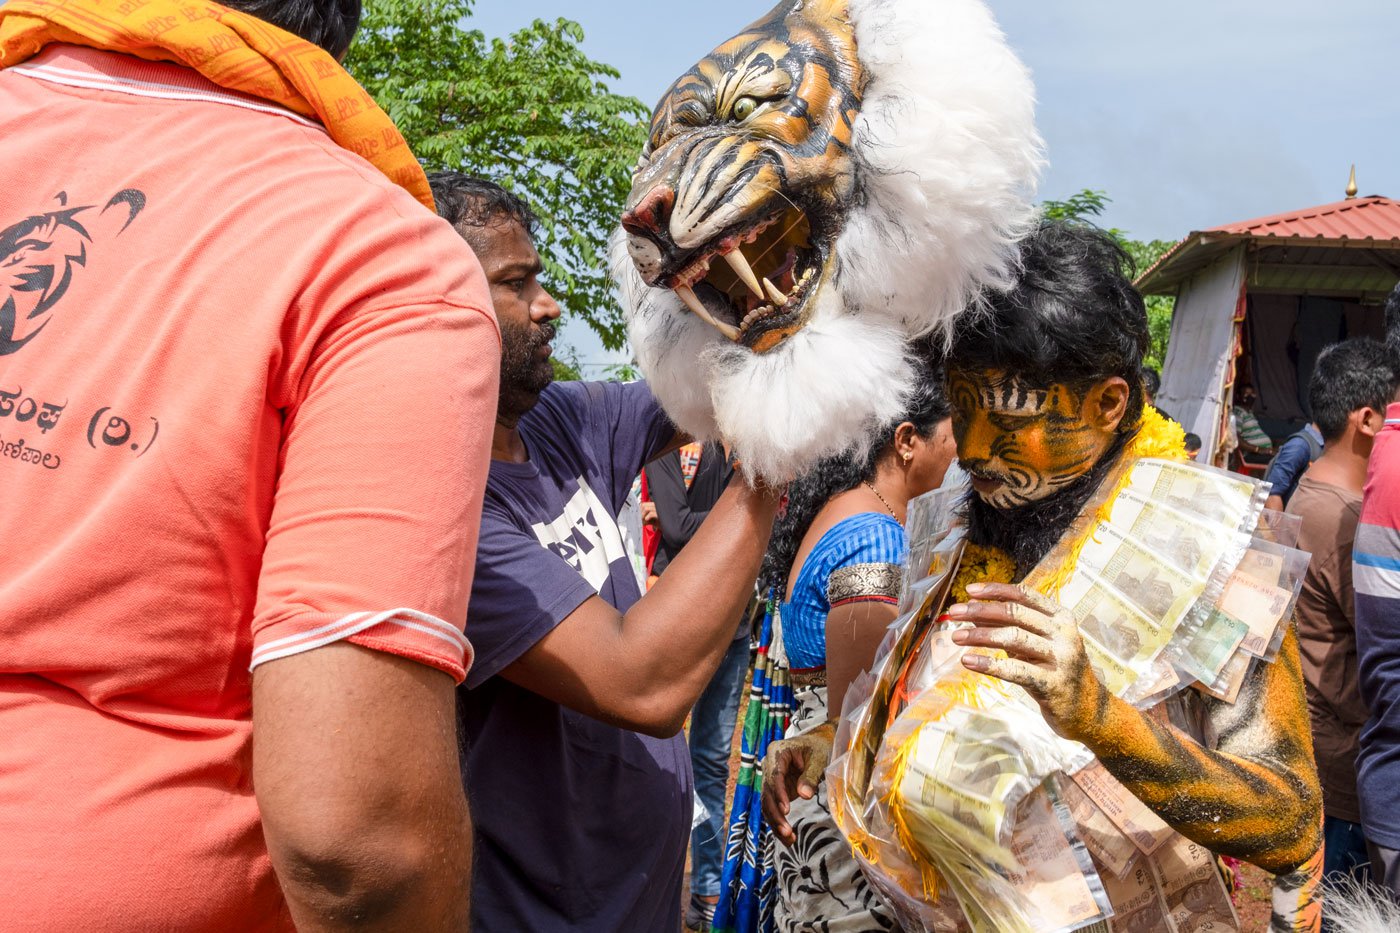 Virendera Shettigar puts on the tiger mask. The one who wears the mask is usually the prime tiger of the group